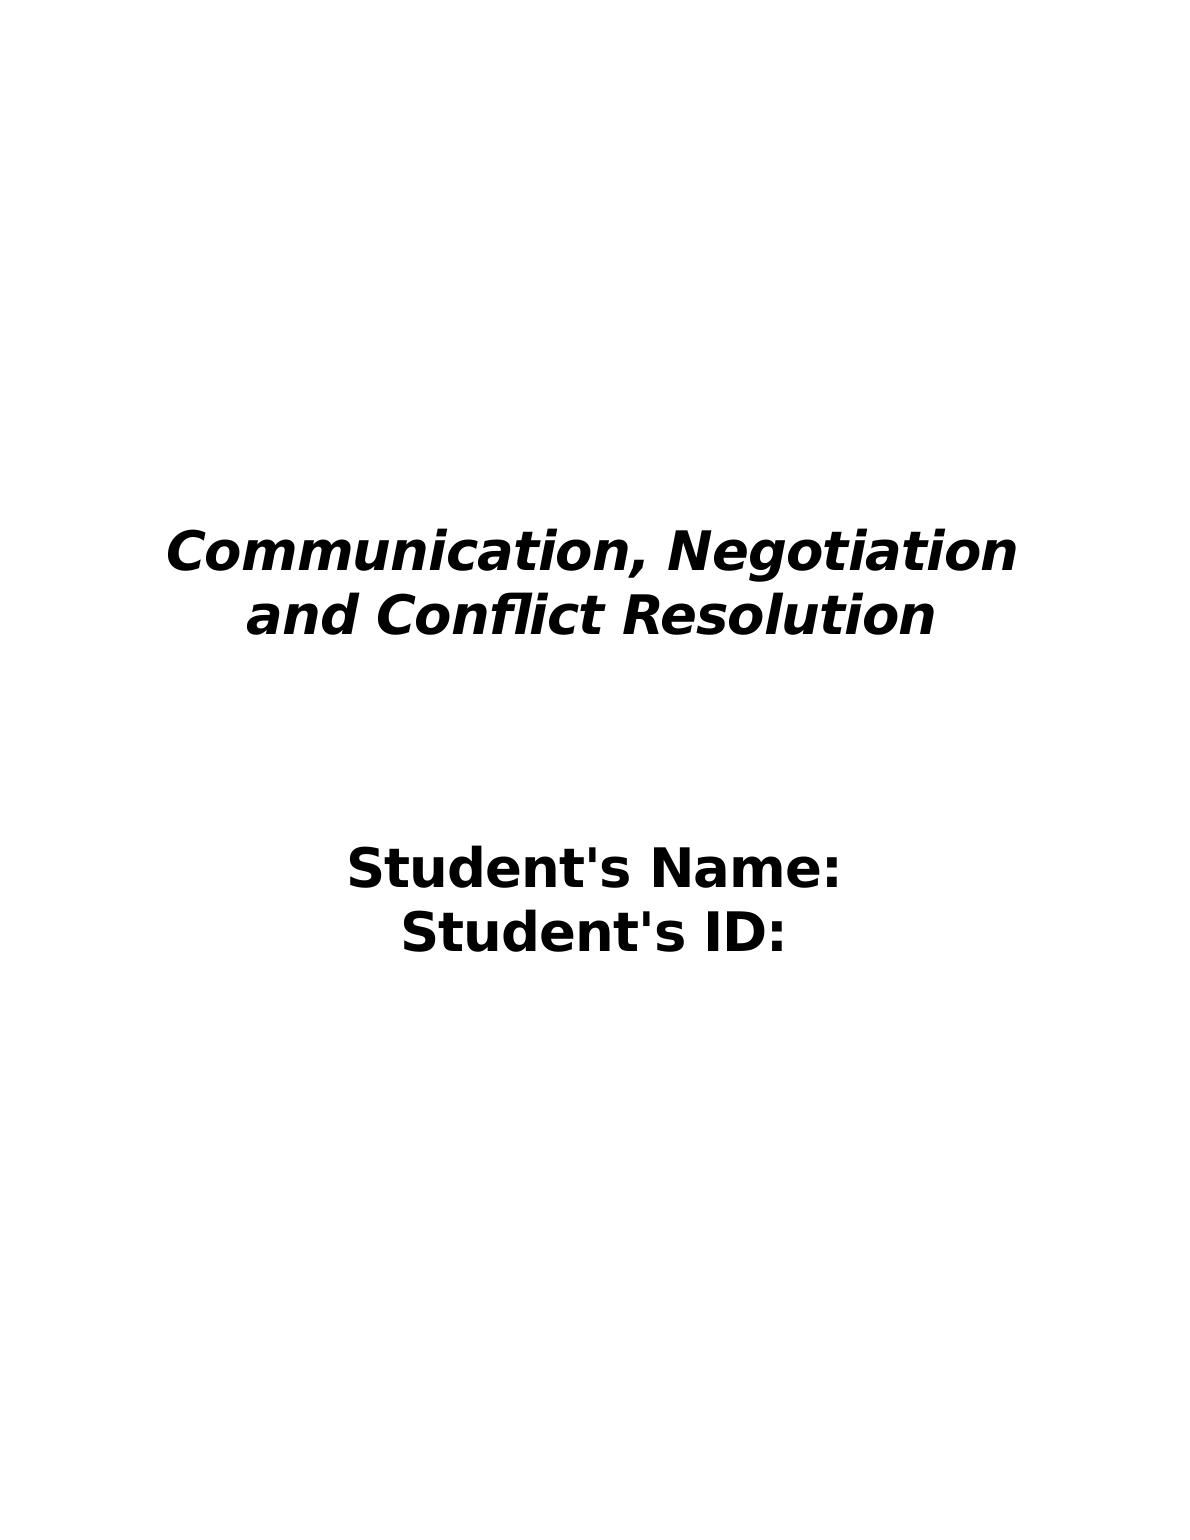 Communication, Negotiation and Conflict Resolution: Analyzing Conflict Situations and Providing Solutions_1